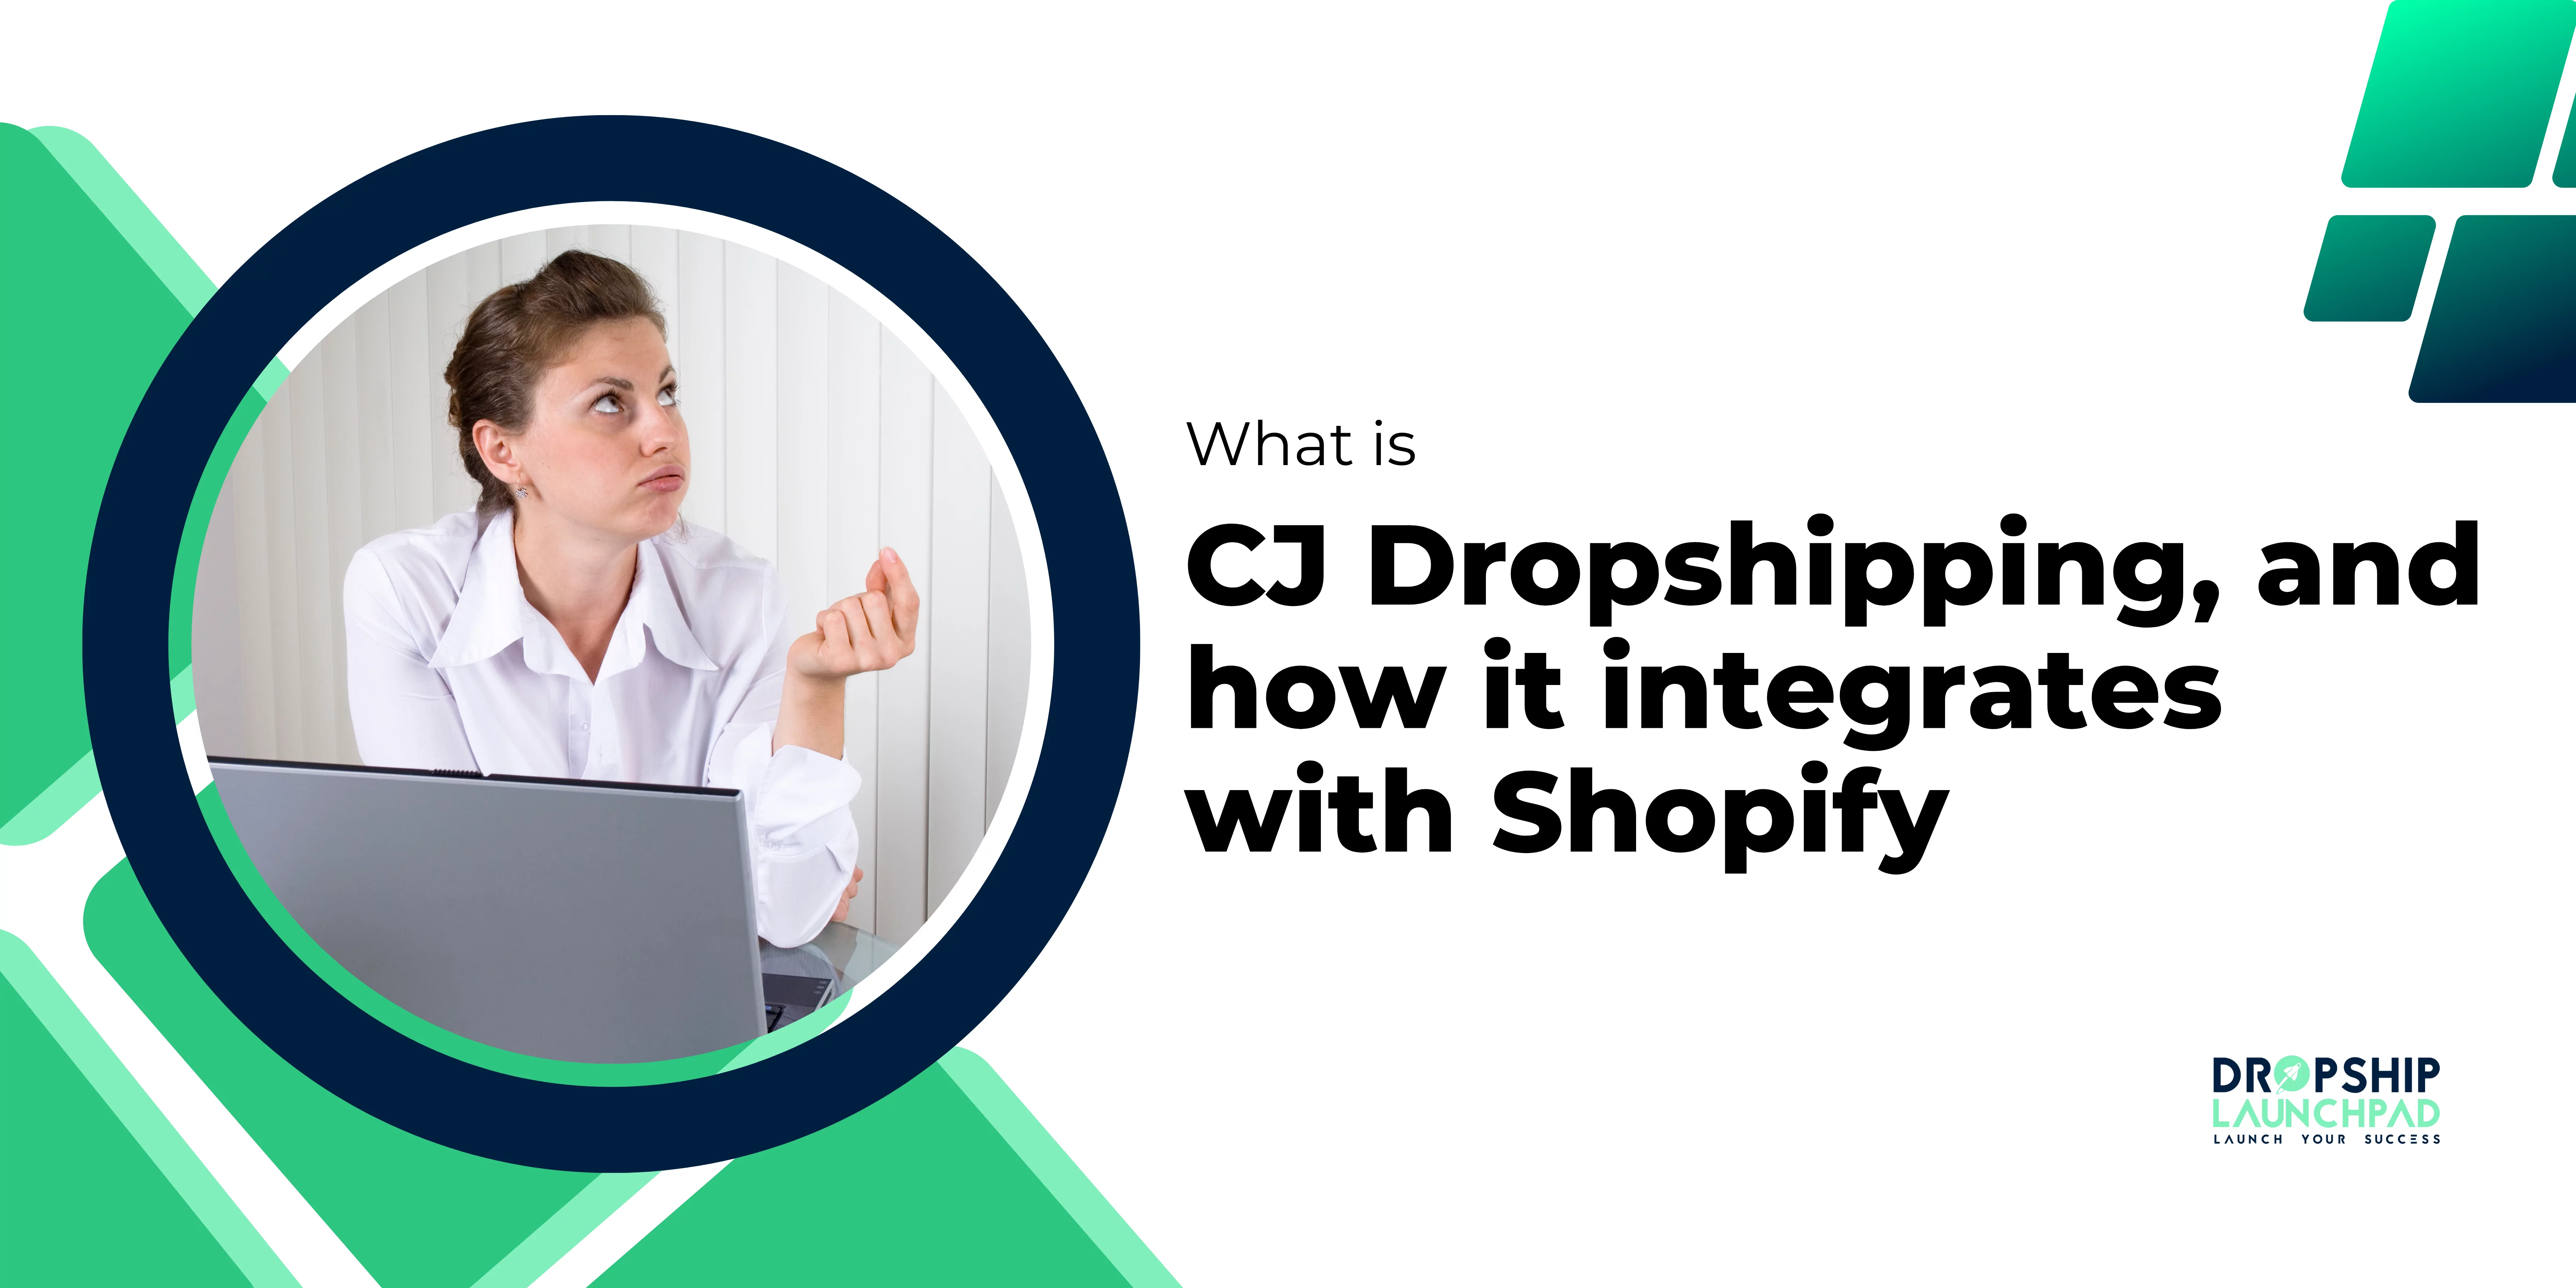 What is CJ Dropshipping, and how it integrates with Shopify